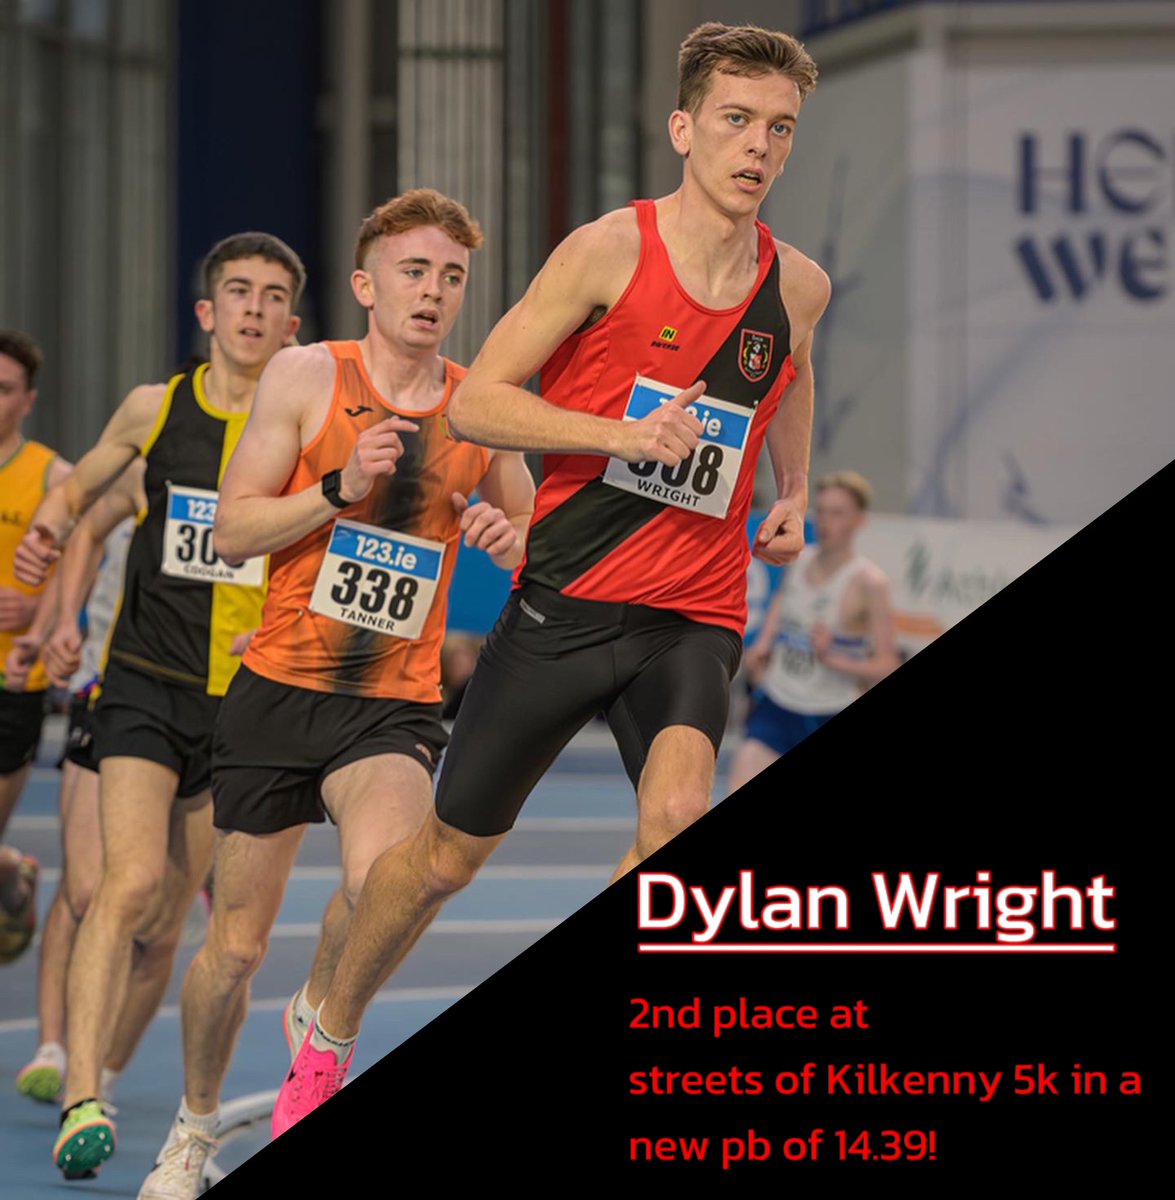 Congratulations to Dylan Wright who placed second tonight at the streets of Kilkenny 5k in a time of 14.39. This was a 26 second pb for Dylan🔴⚫️